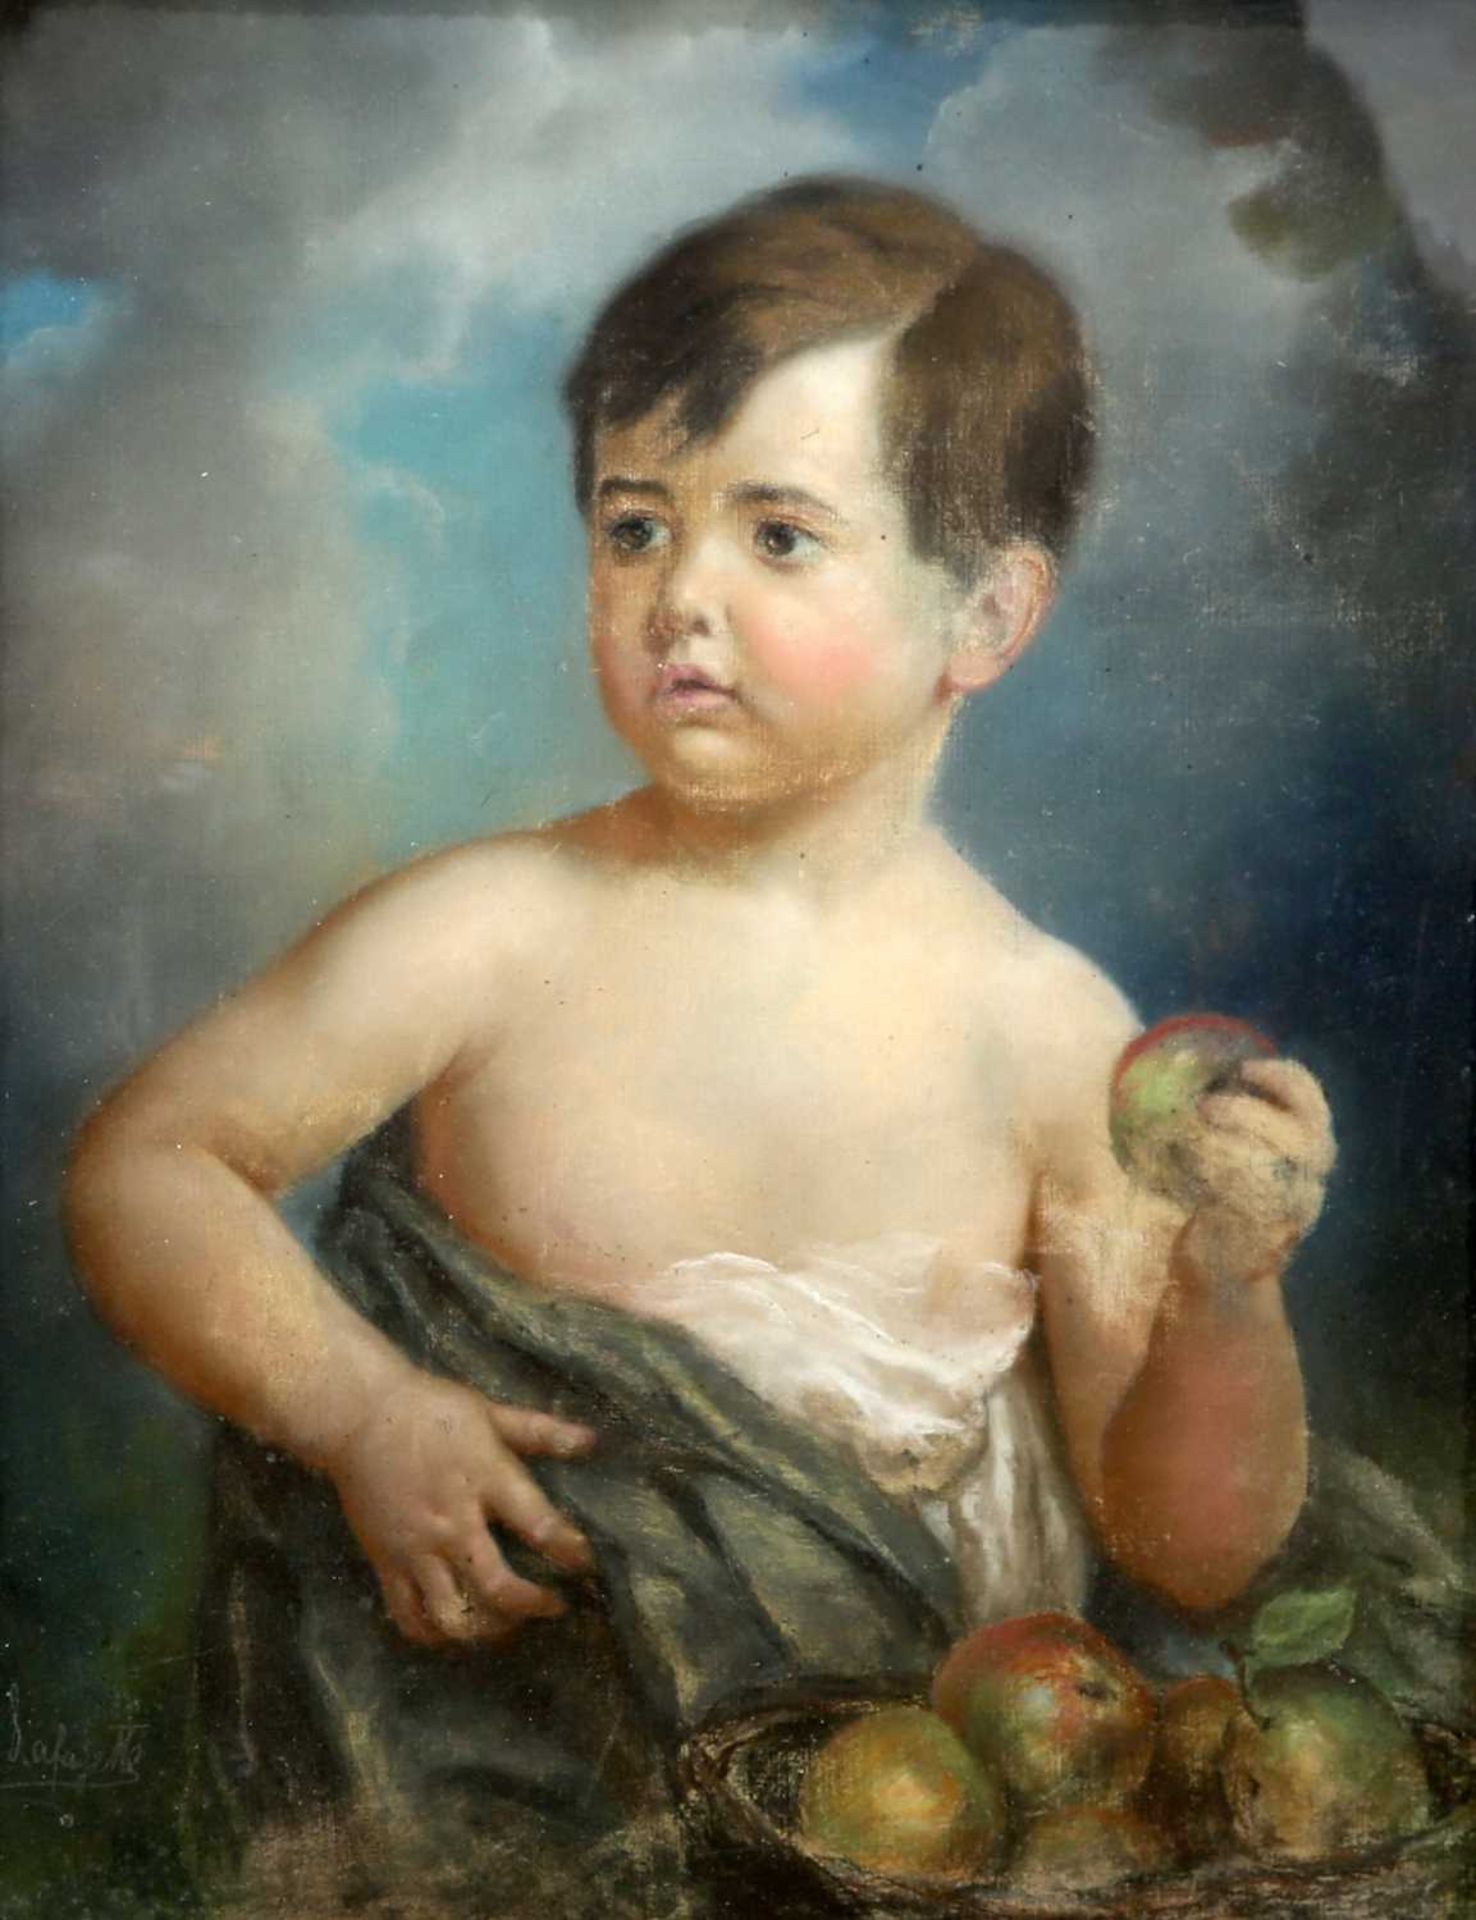 ENGLISH SCHOOL (LATE 19TH CENTURY) PORTRAIT OF A BOY WITH APPLES